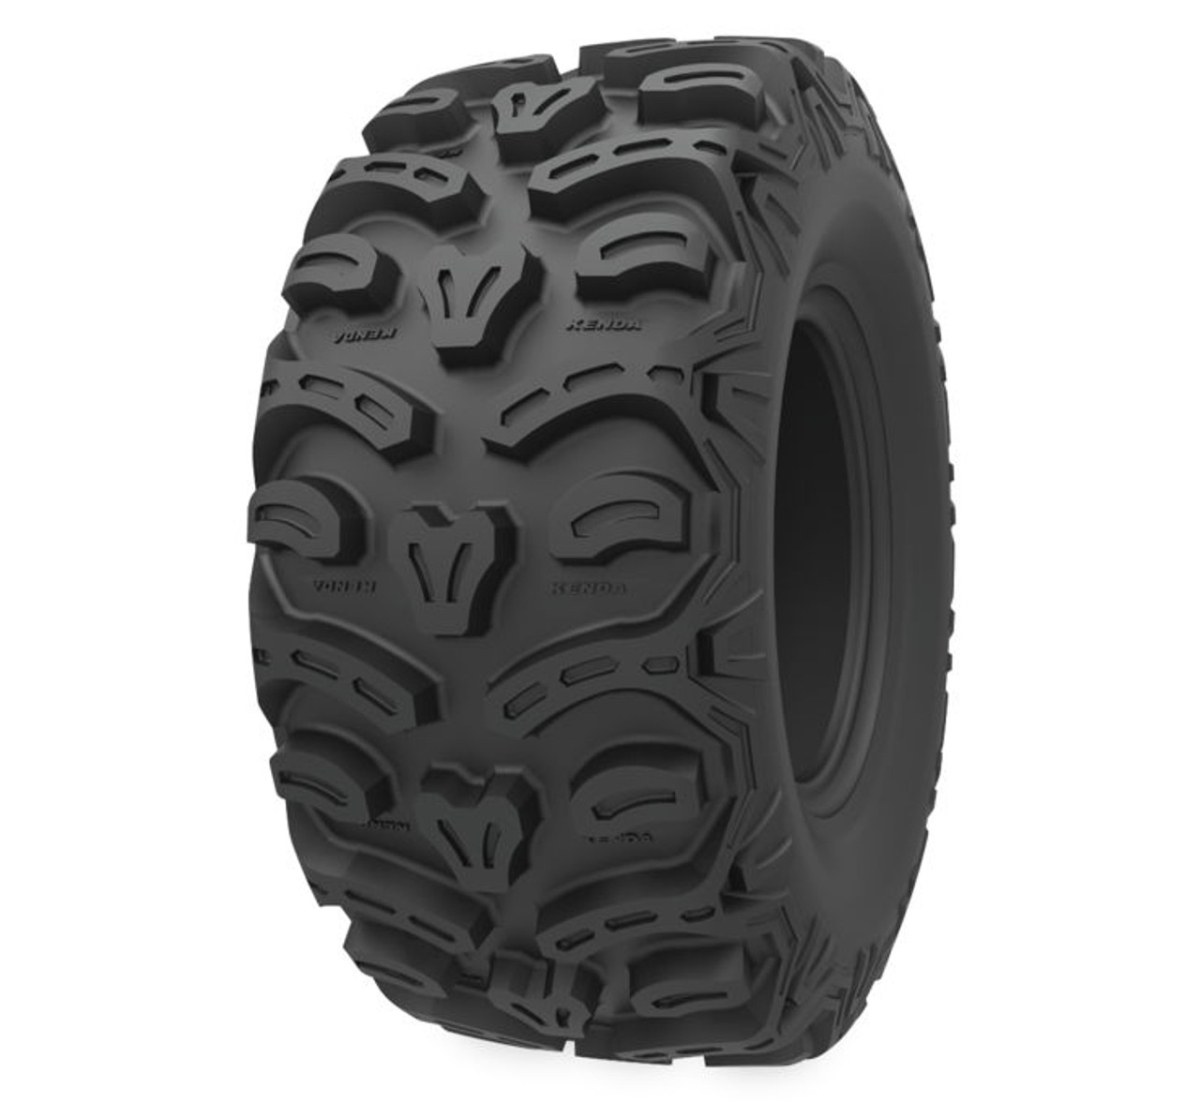 Picture of Kenda 085871271D1 K587 27 x 11R12 in. Bearclaw Rear HTR 8P Tire